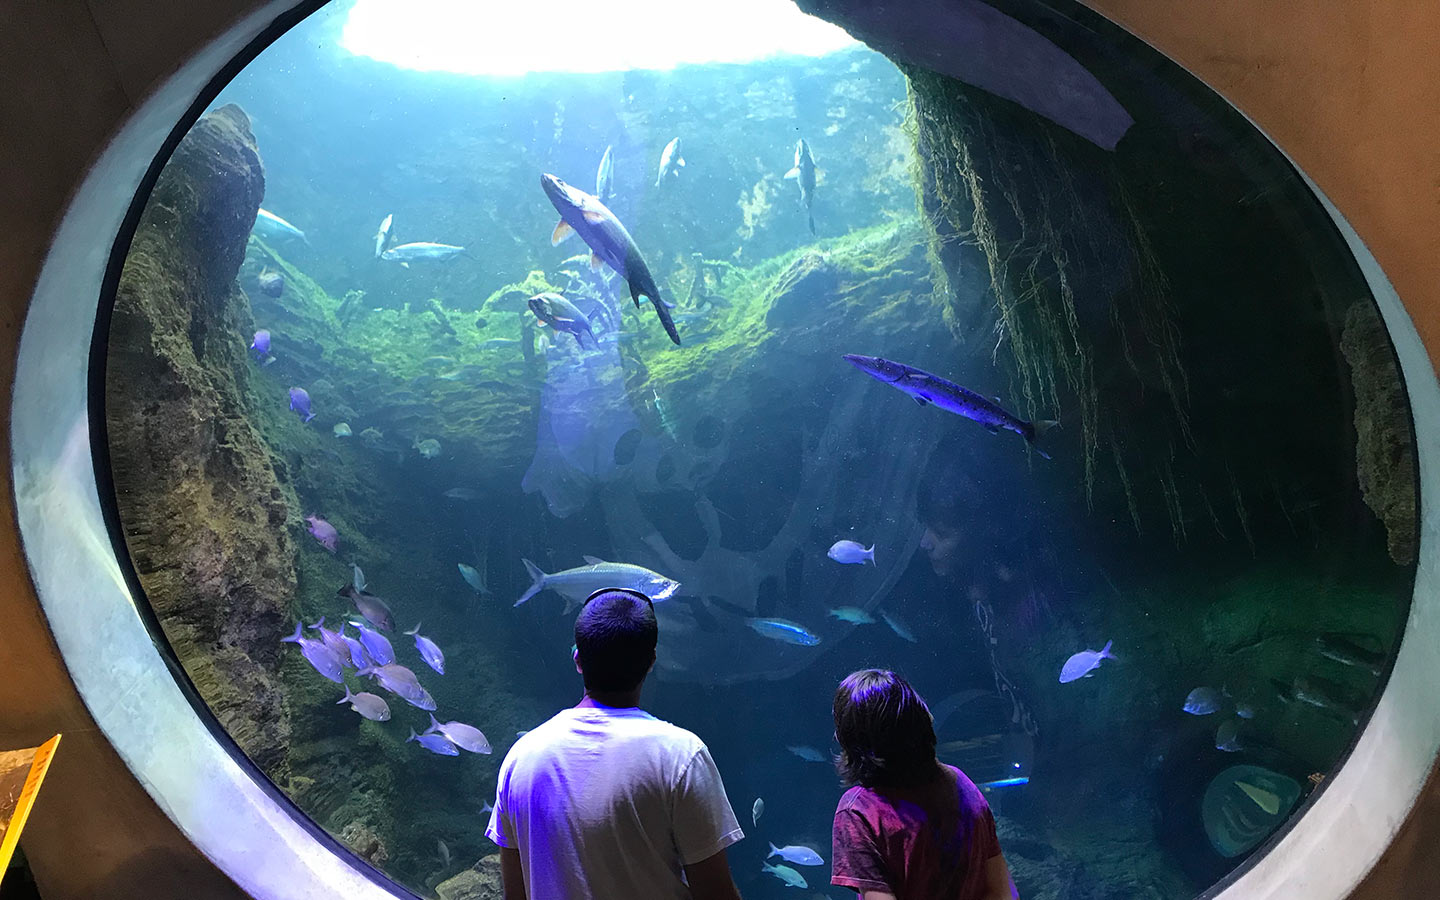 Siblings enjoy fish viewing at Frost Science Museum